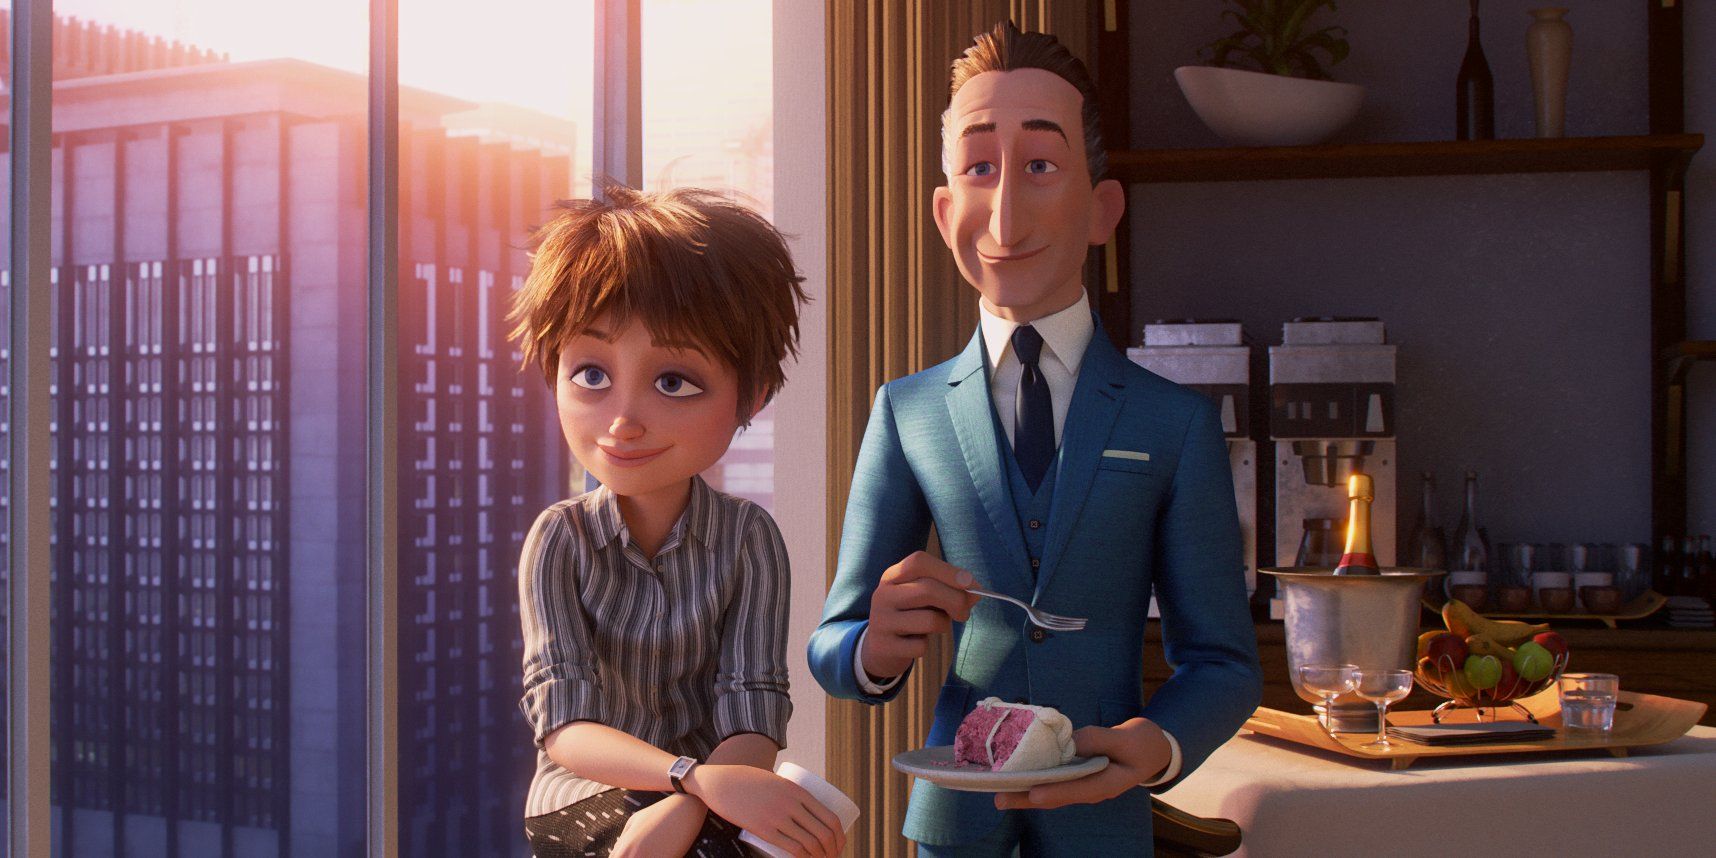 Evelyn and brother Winston in The Incredibles 2.